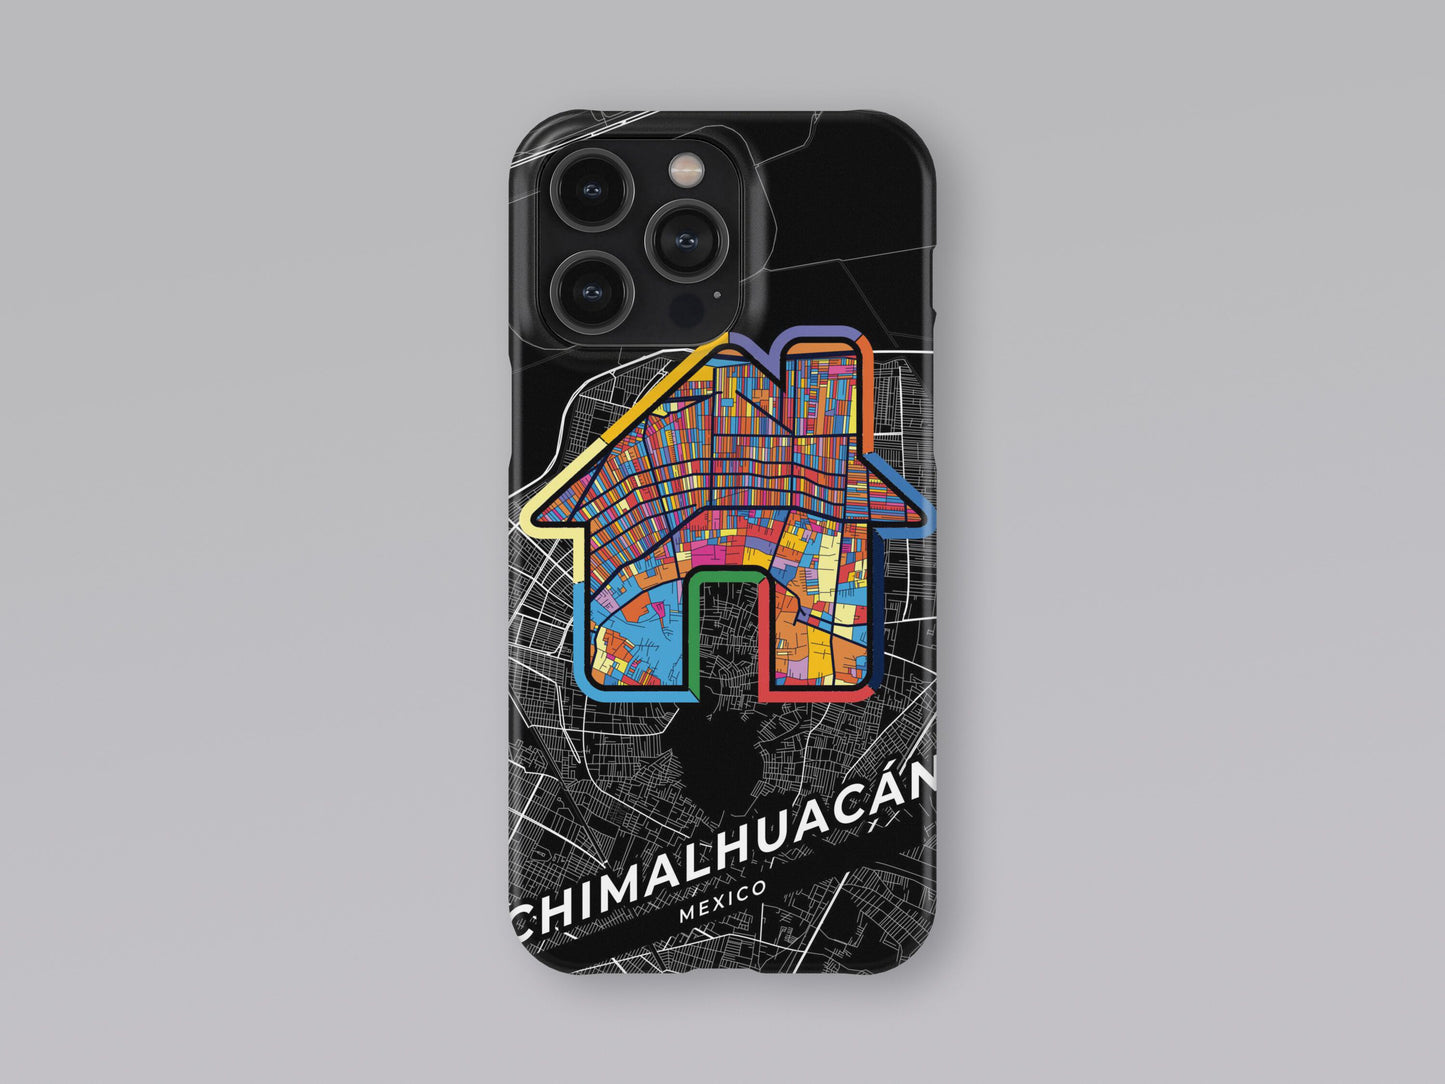 Chimalhuacán Mexico slim phone case with colorful icon. Birthday, wedding or housewarming gift. Couple match cases. 3